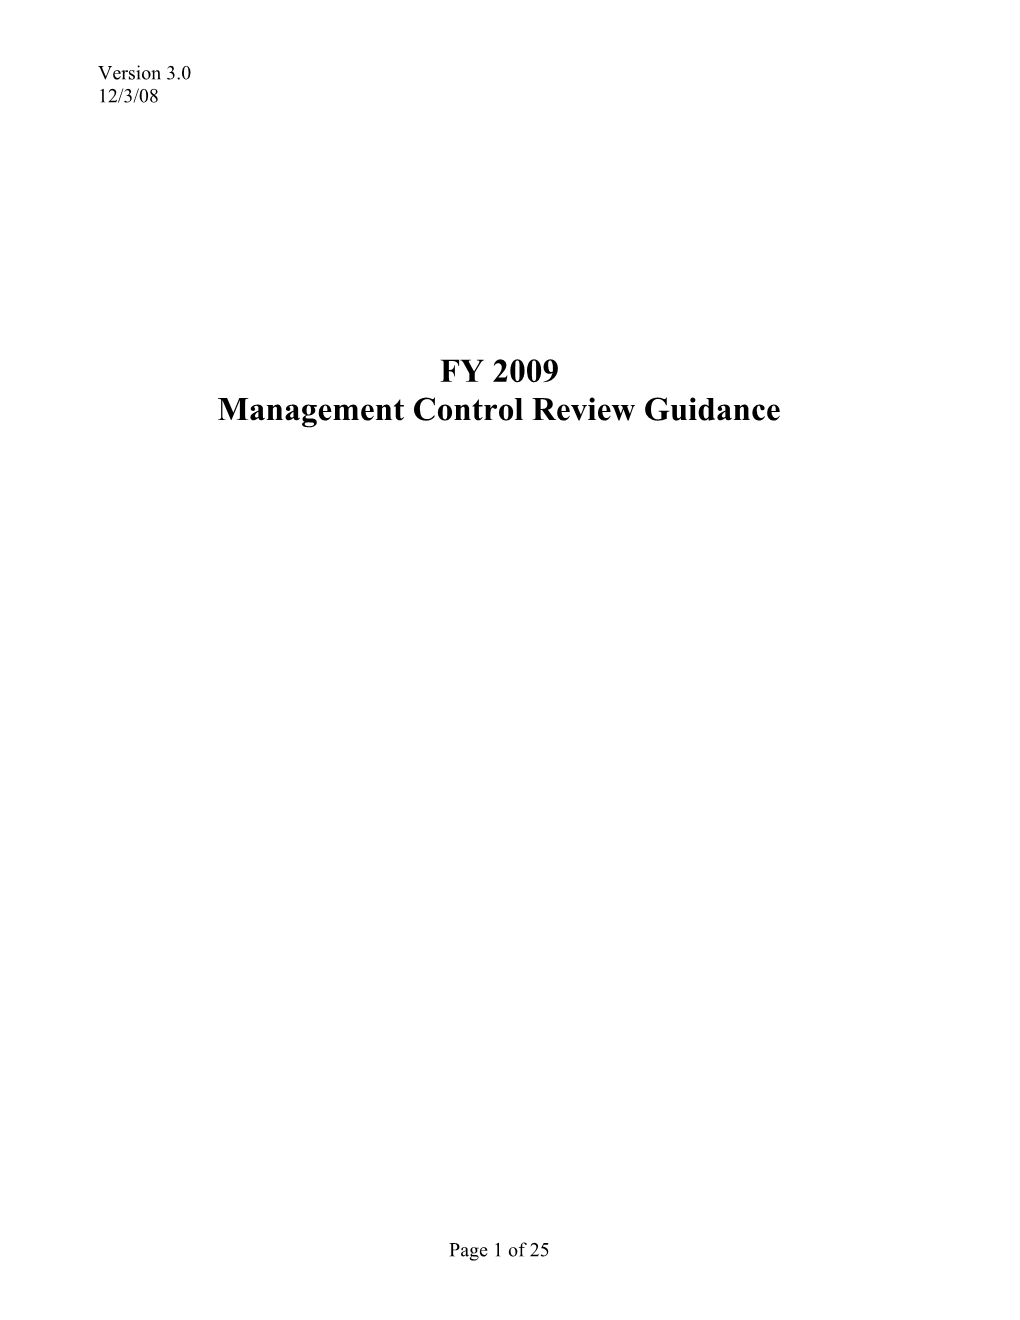 Management Control Review Guidance